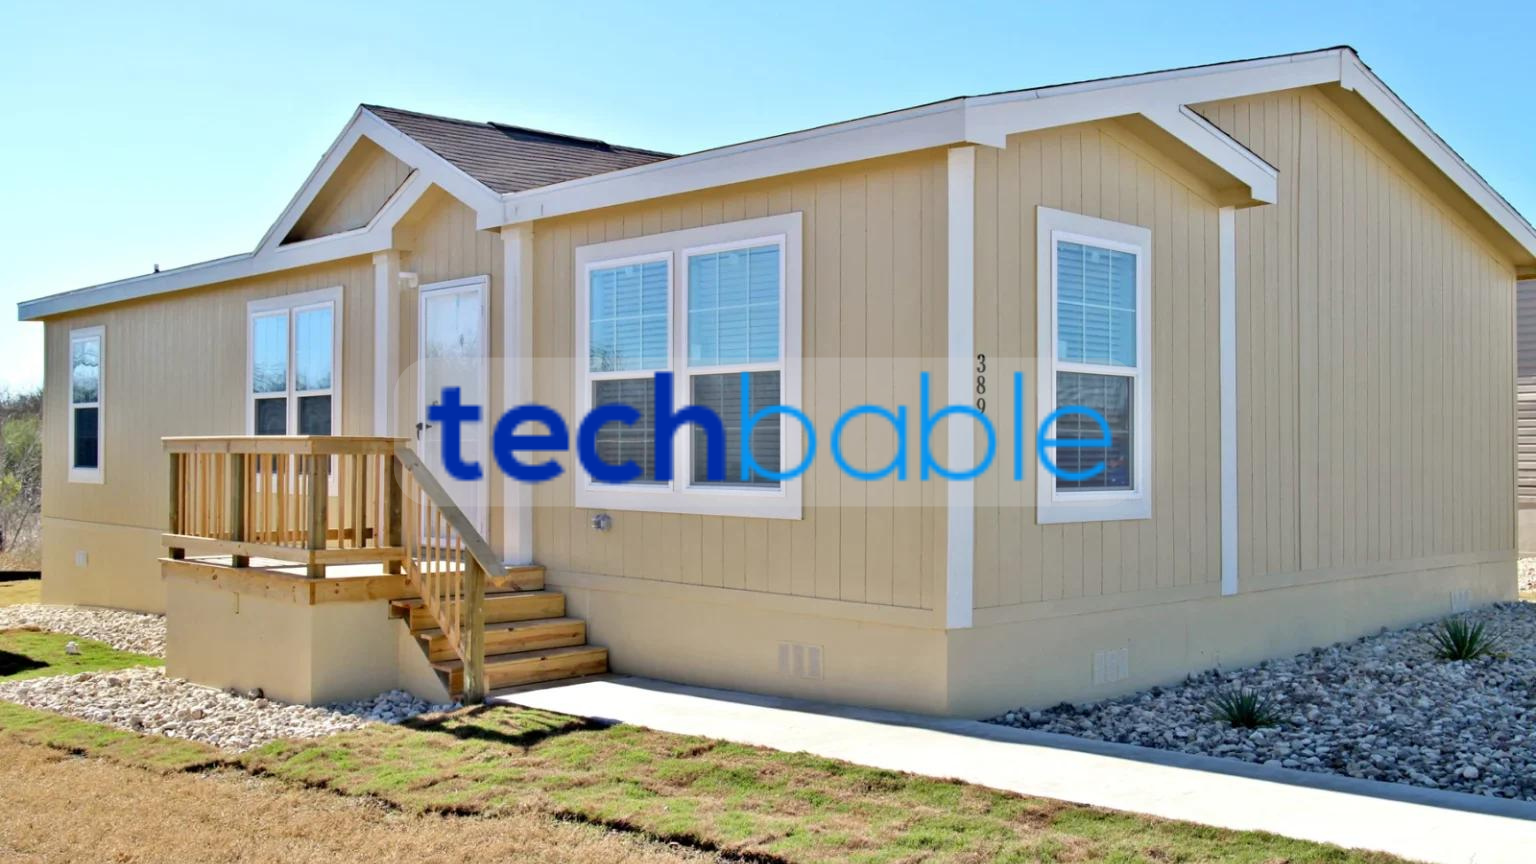 used Mobile Homes For Sale